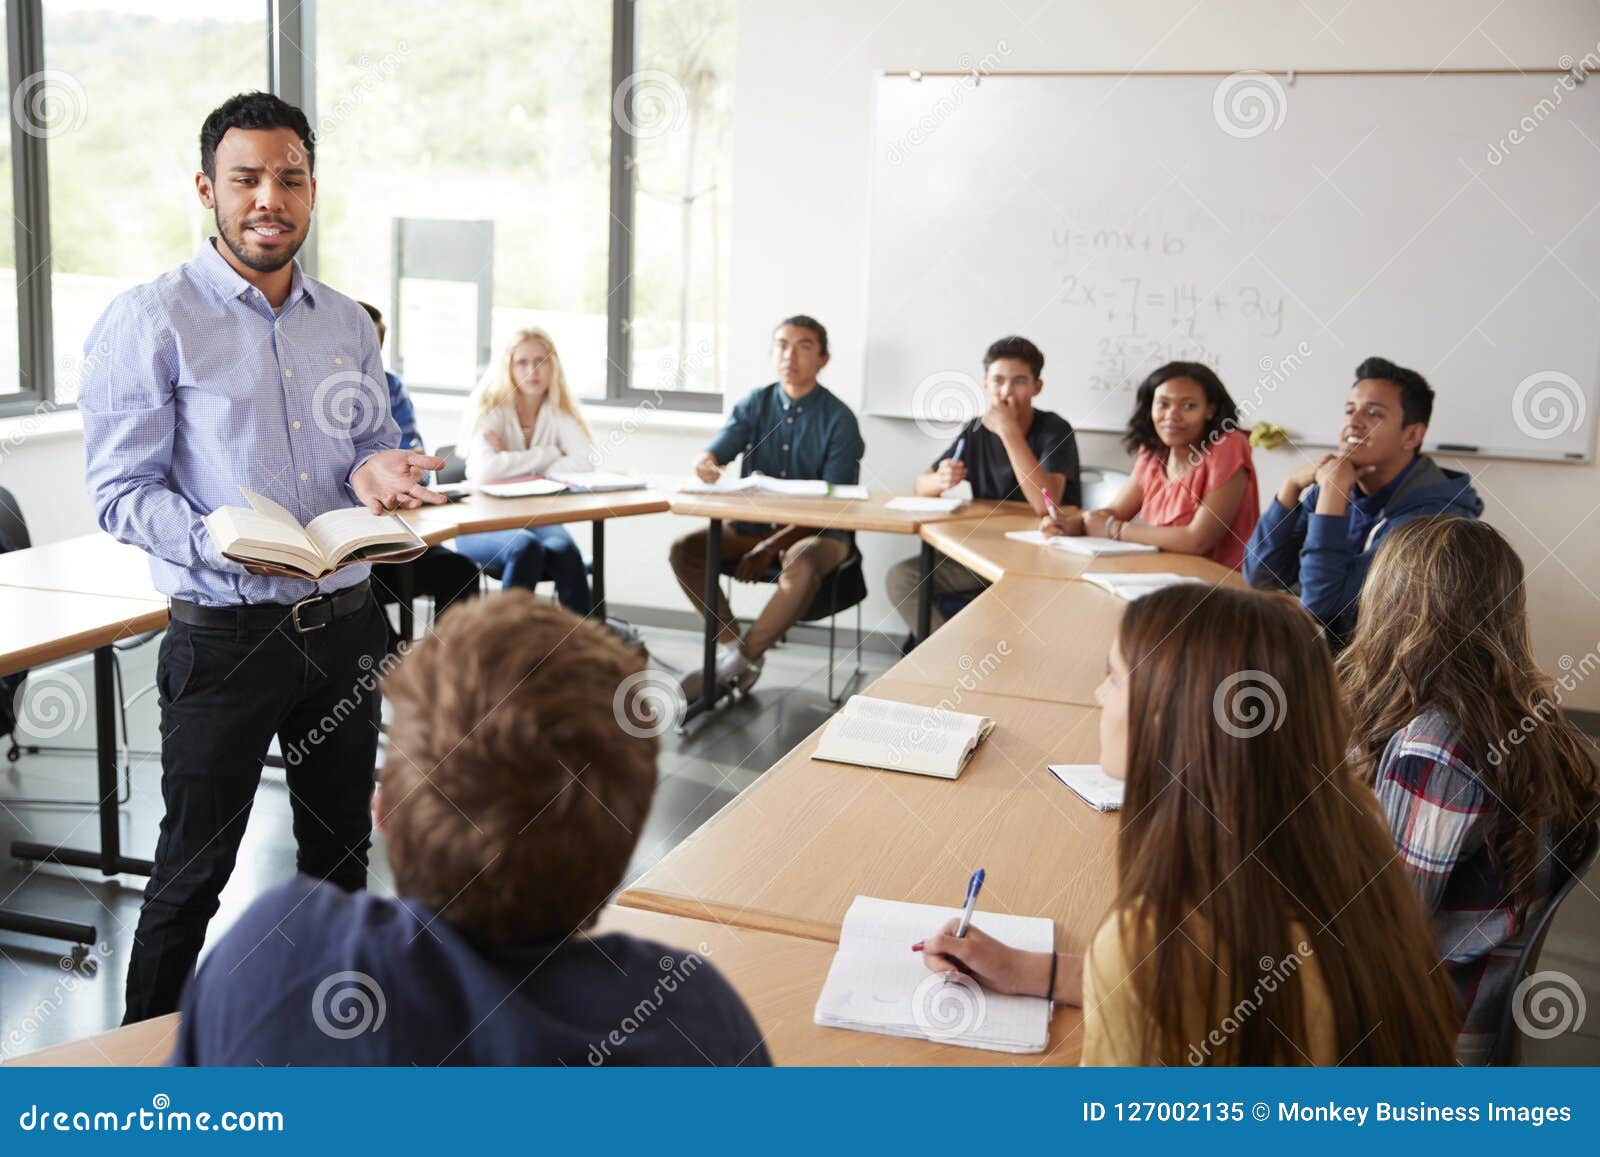 male high school tutor with pupils sitting at table teaching maths class